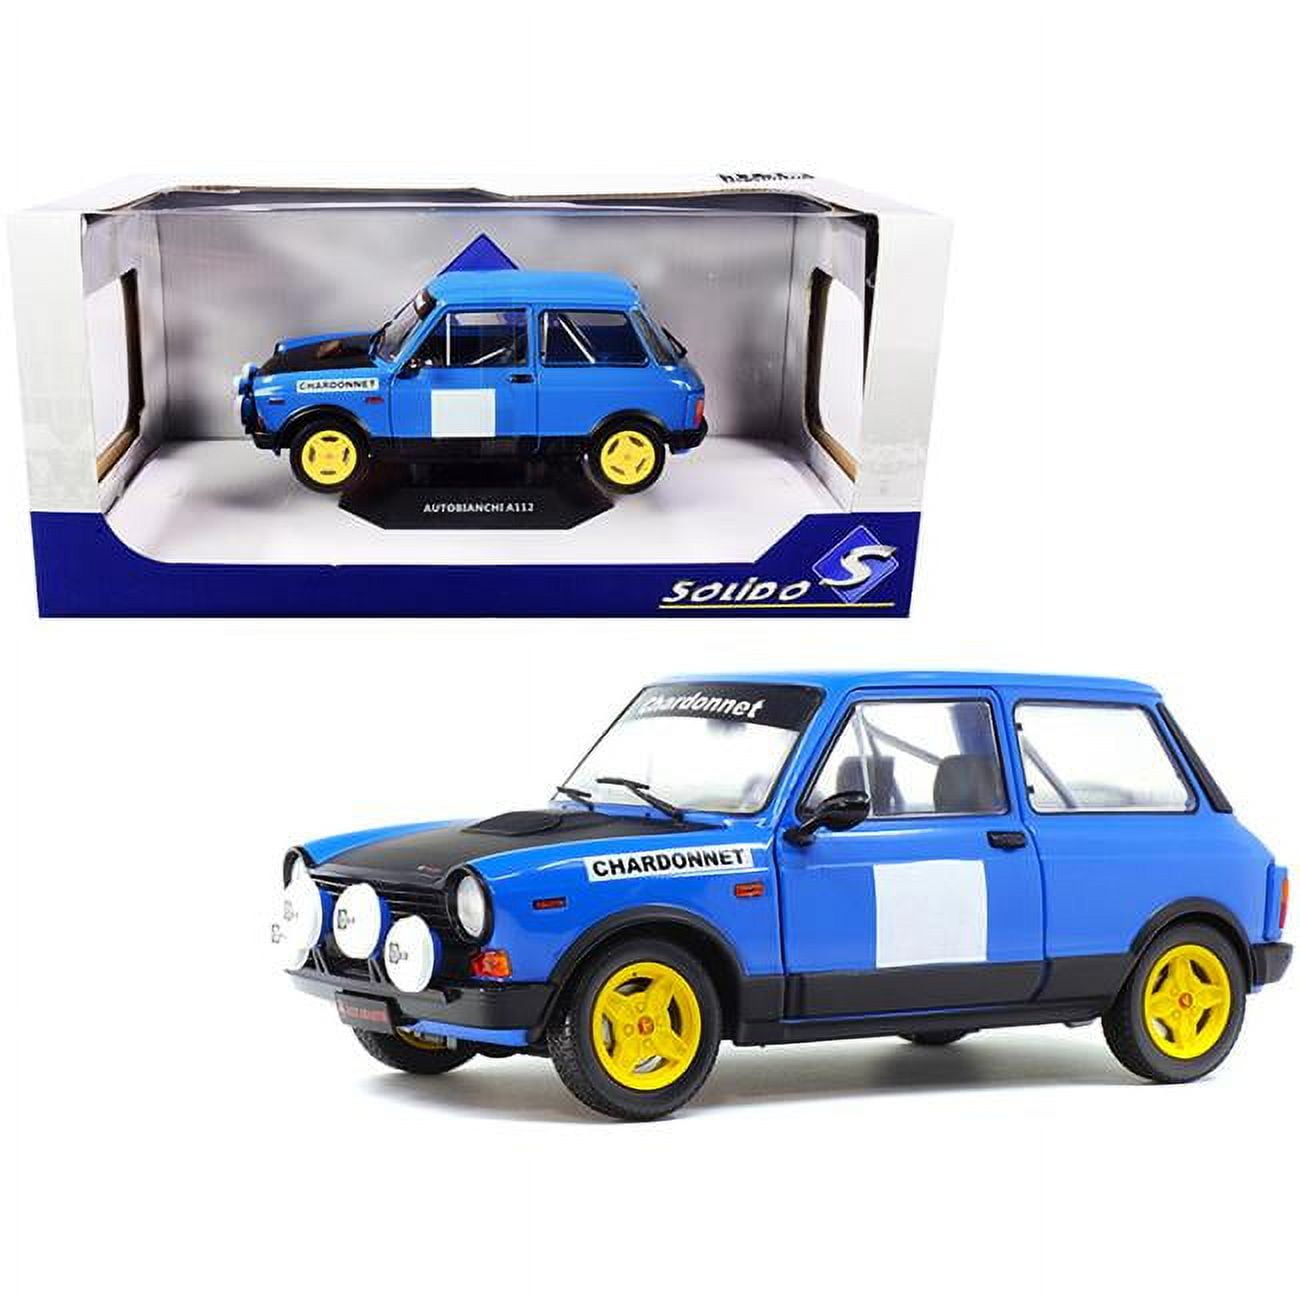 Picture of Solido S1803801 1-18 Diecast Model Car for 1980 Autobianchi A112 Abarth Blue Chardonnet Rally Car